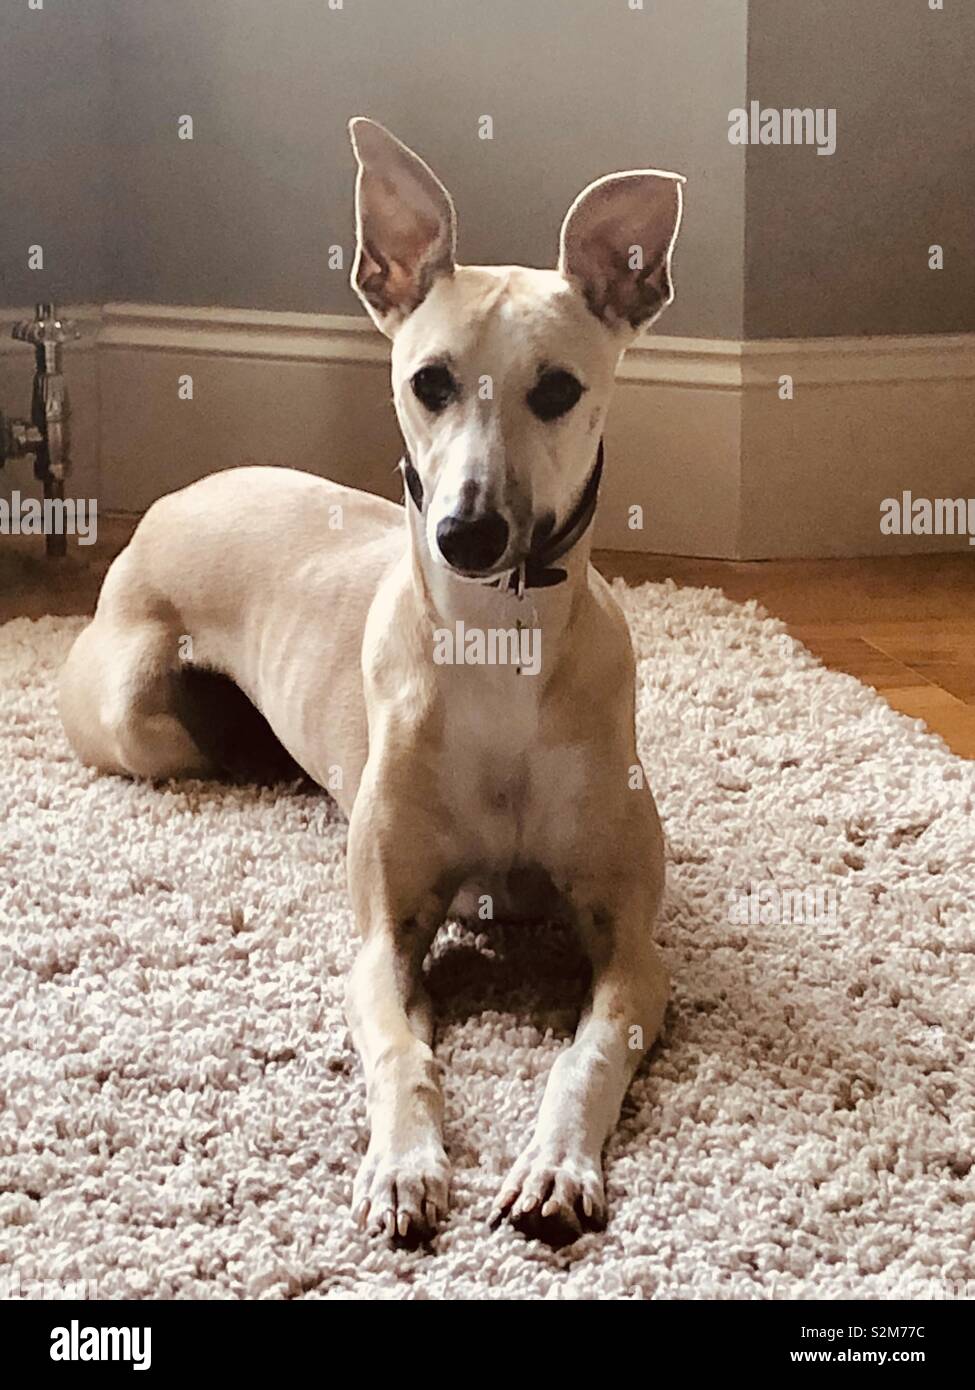 Jesse the whippet dog sitting on a rug, looking alert with his ears raised up Stock Photo